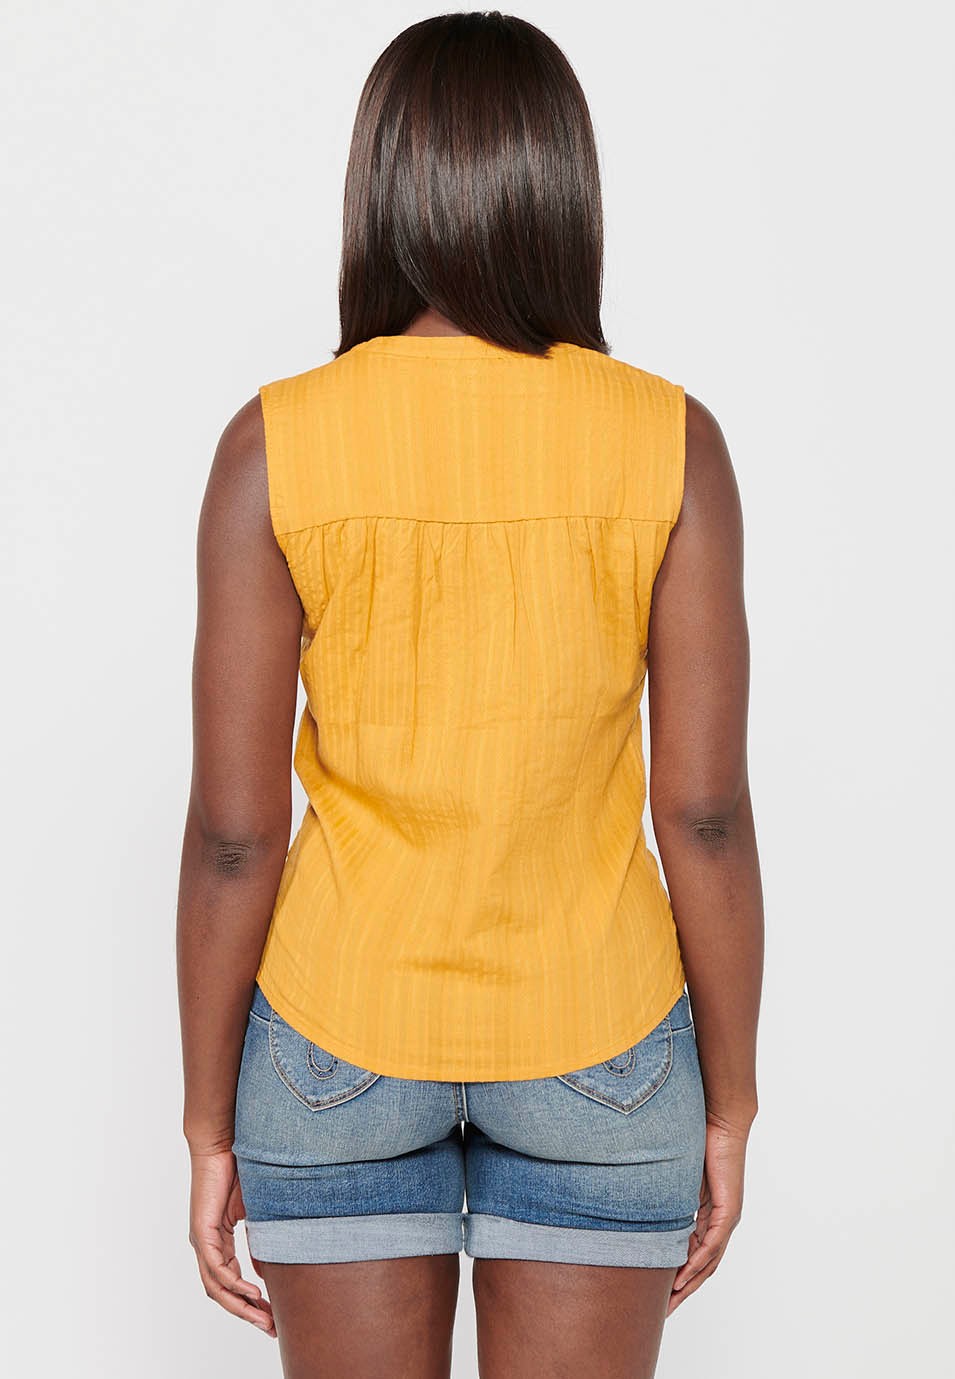 Sleeveless Cotton Blouse with Round Neck and Front Closure with Buttons and Embroidered Details in Mustard Color for Women 7